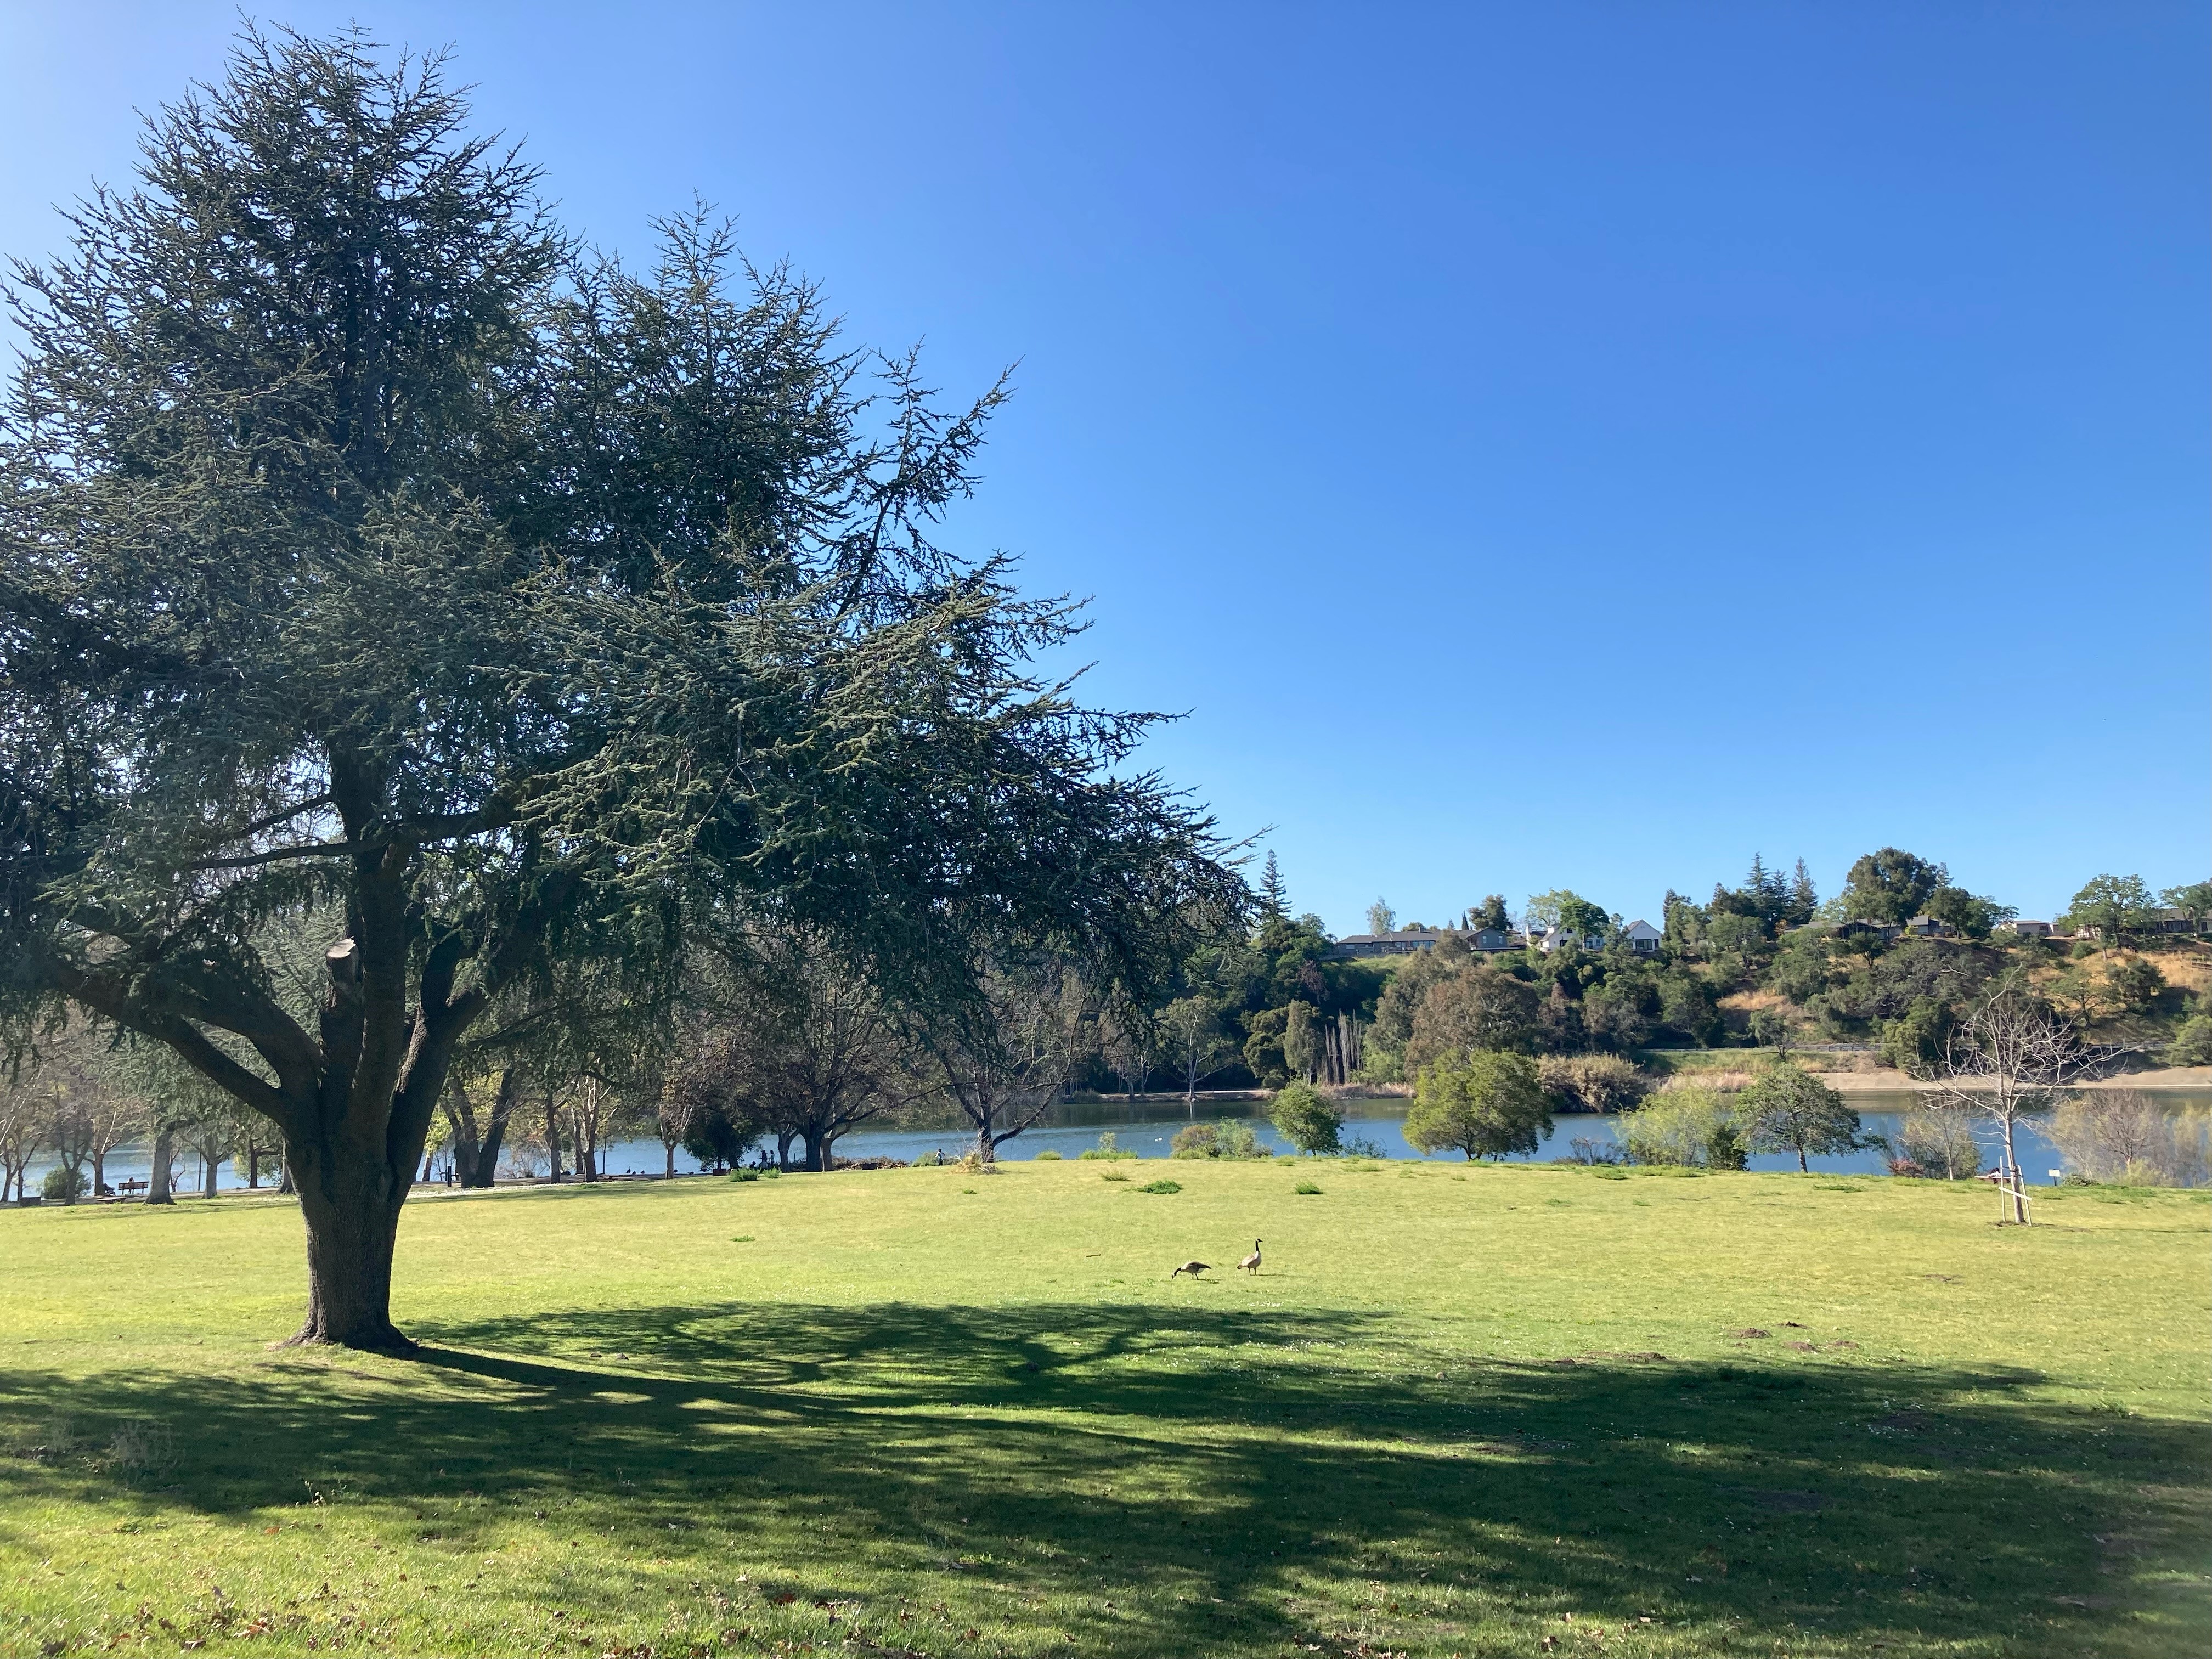 Landscape photo of Vasona Lake County Park with large tree and grass in foreground